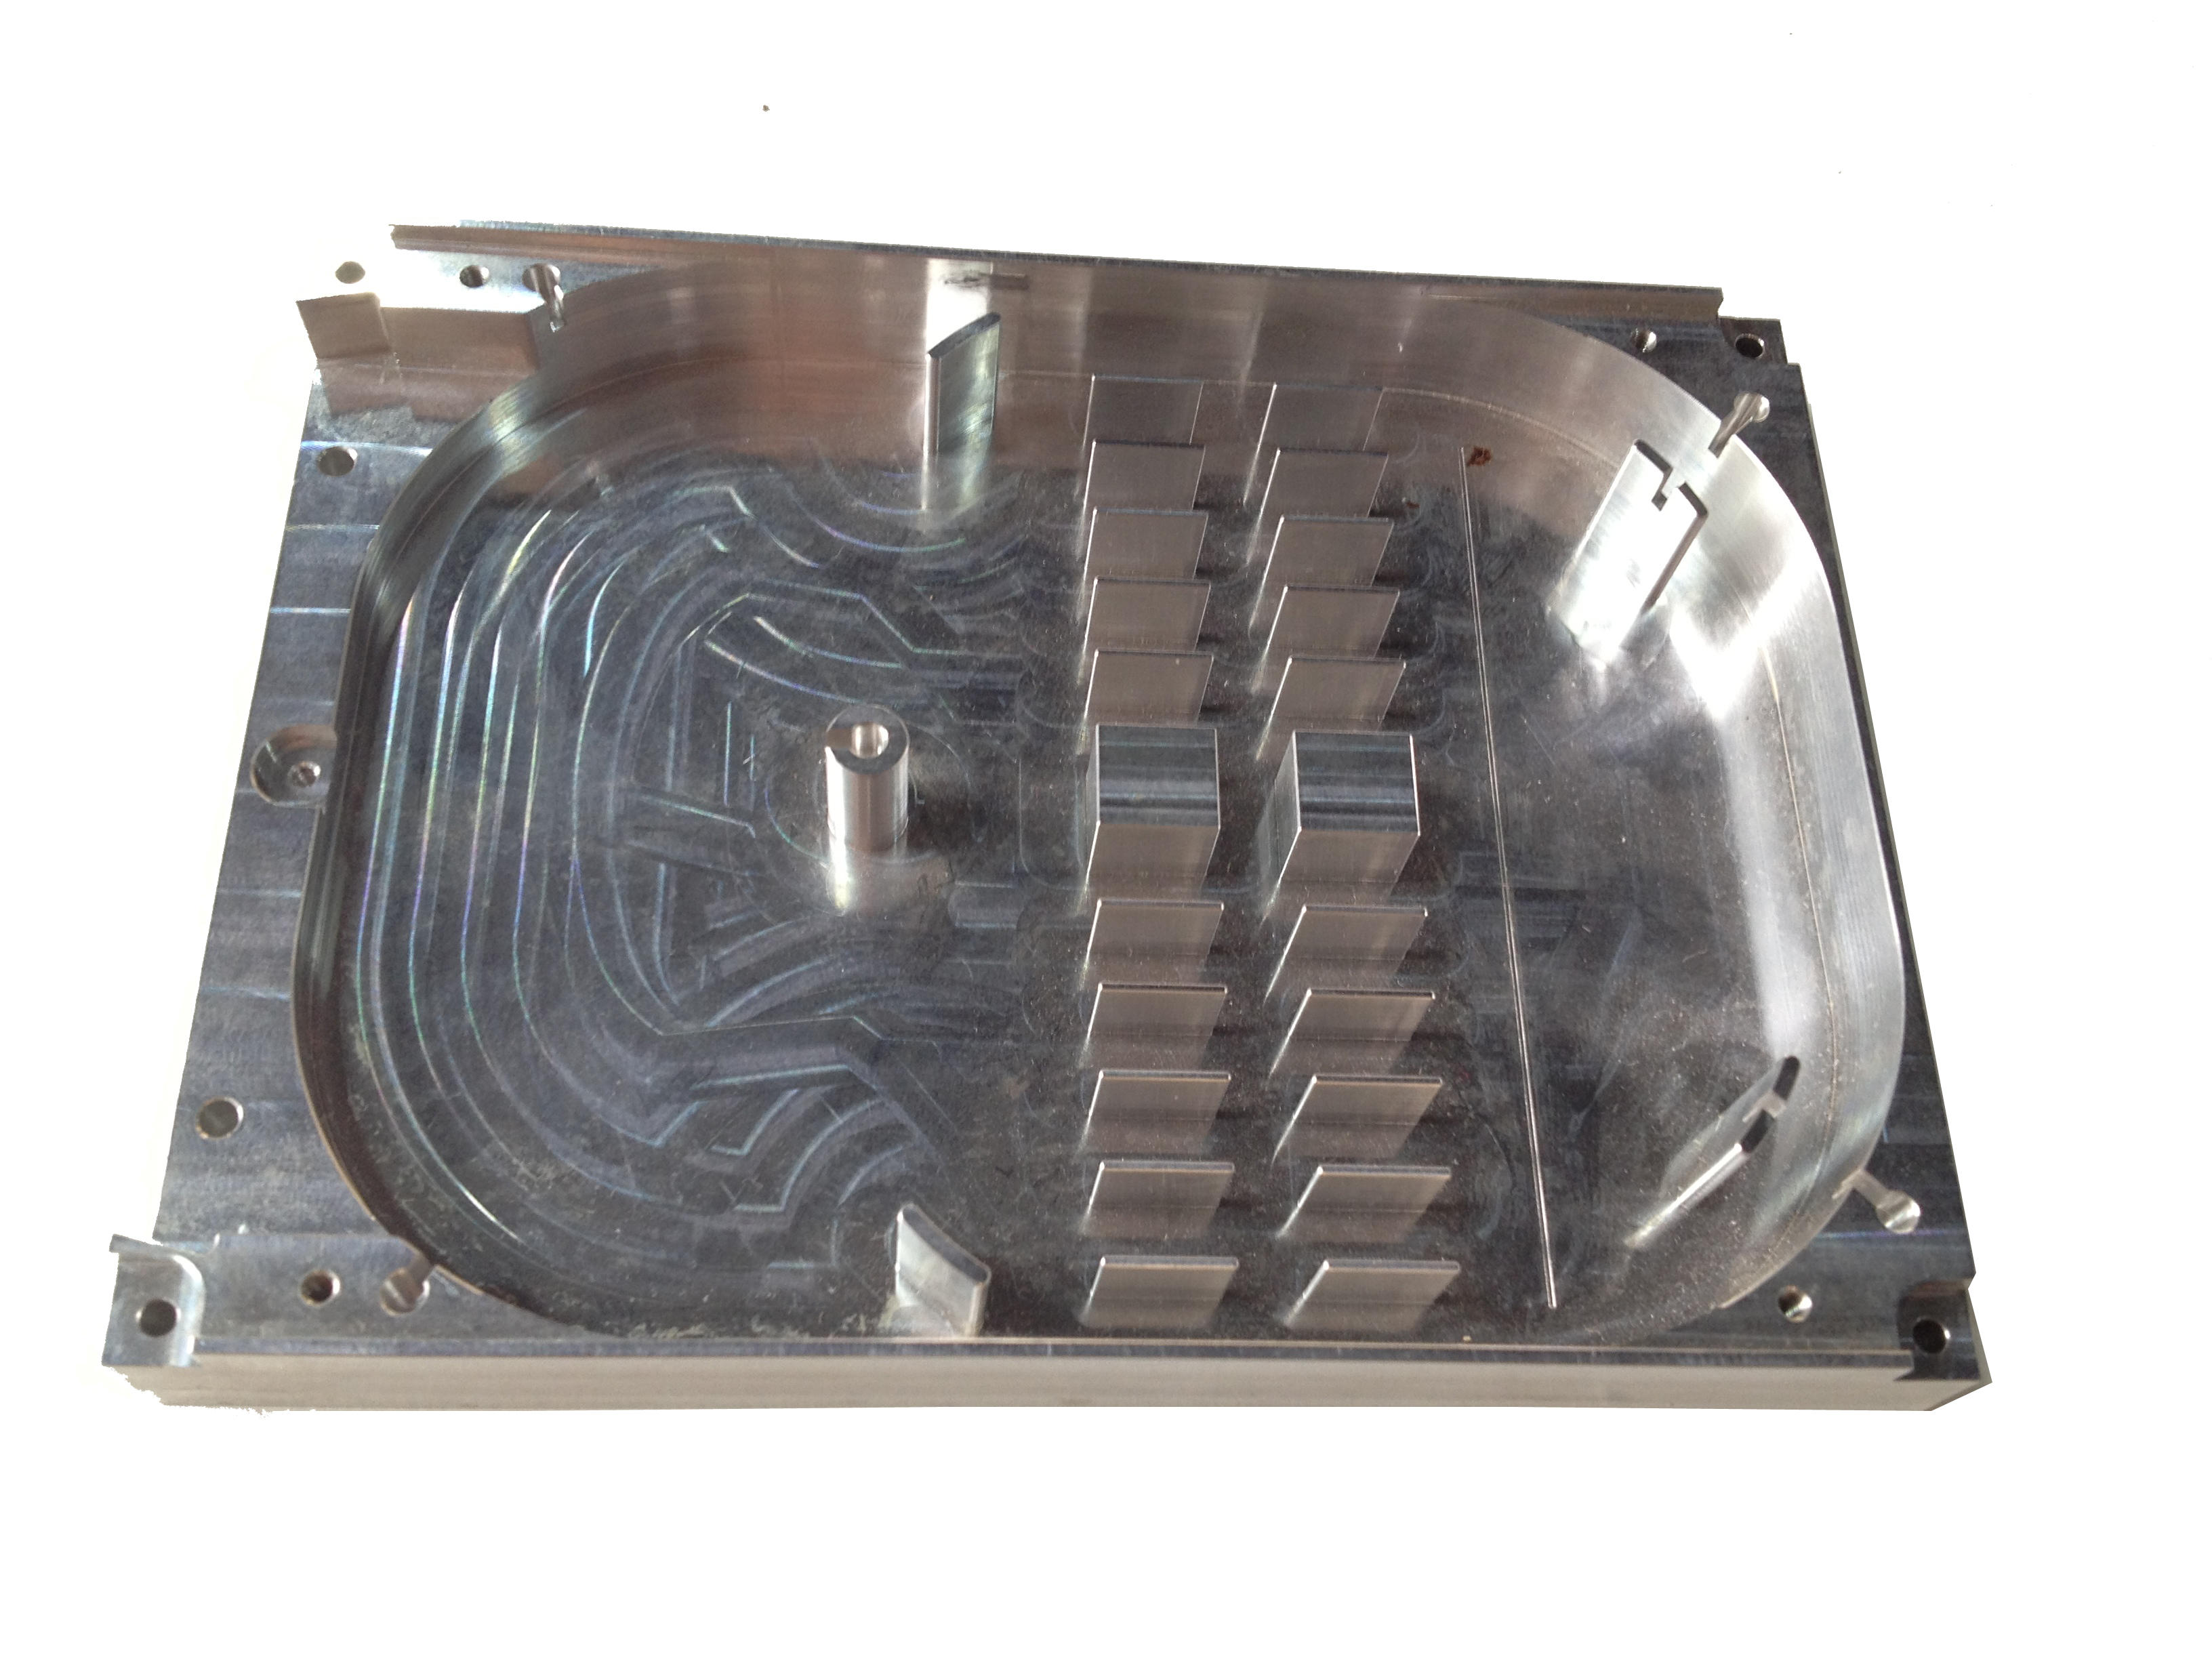 Alloy Die Casting, Die Casting, Cnc Milling, Cnc Turning